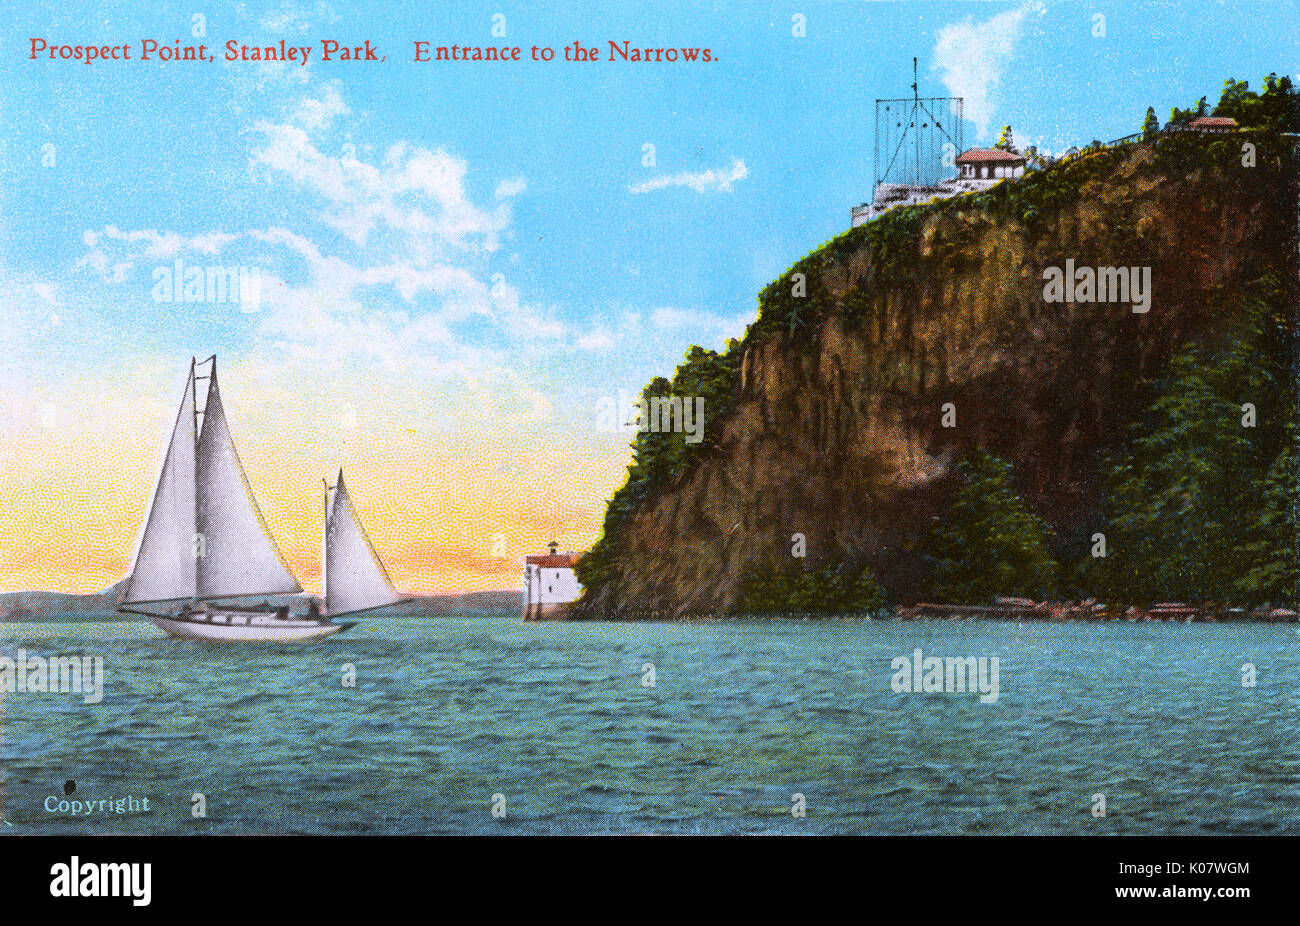 Vancouver, British Columbia, Canada - Prospect Point, Stanley Park - entrance to 'The Narrows'.     Date: 1929 Stock Photo